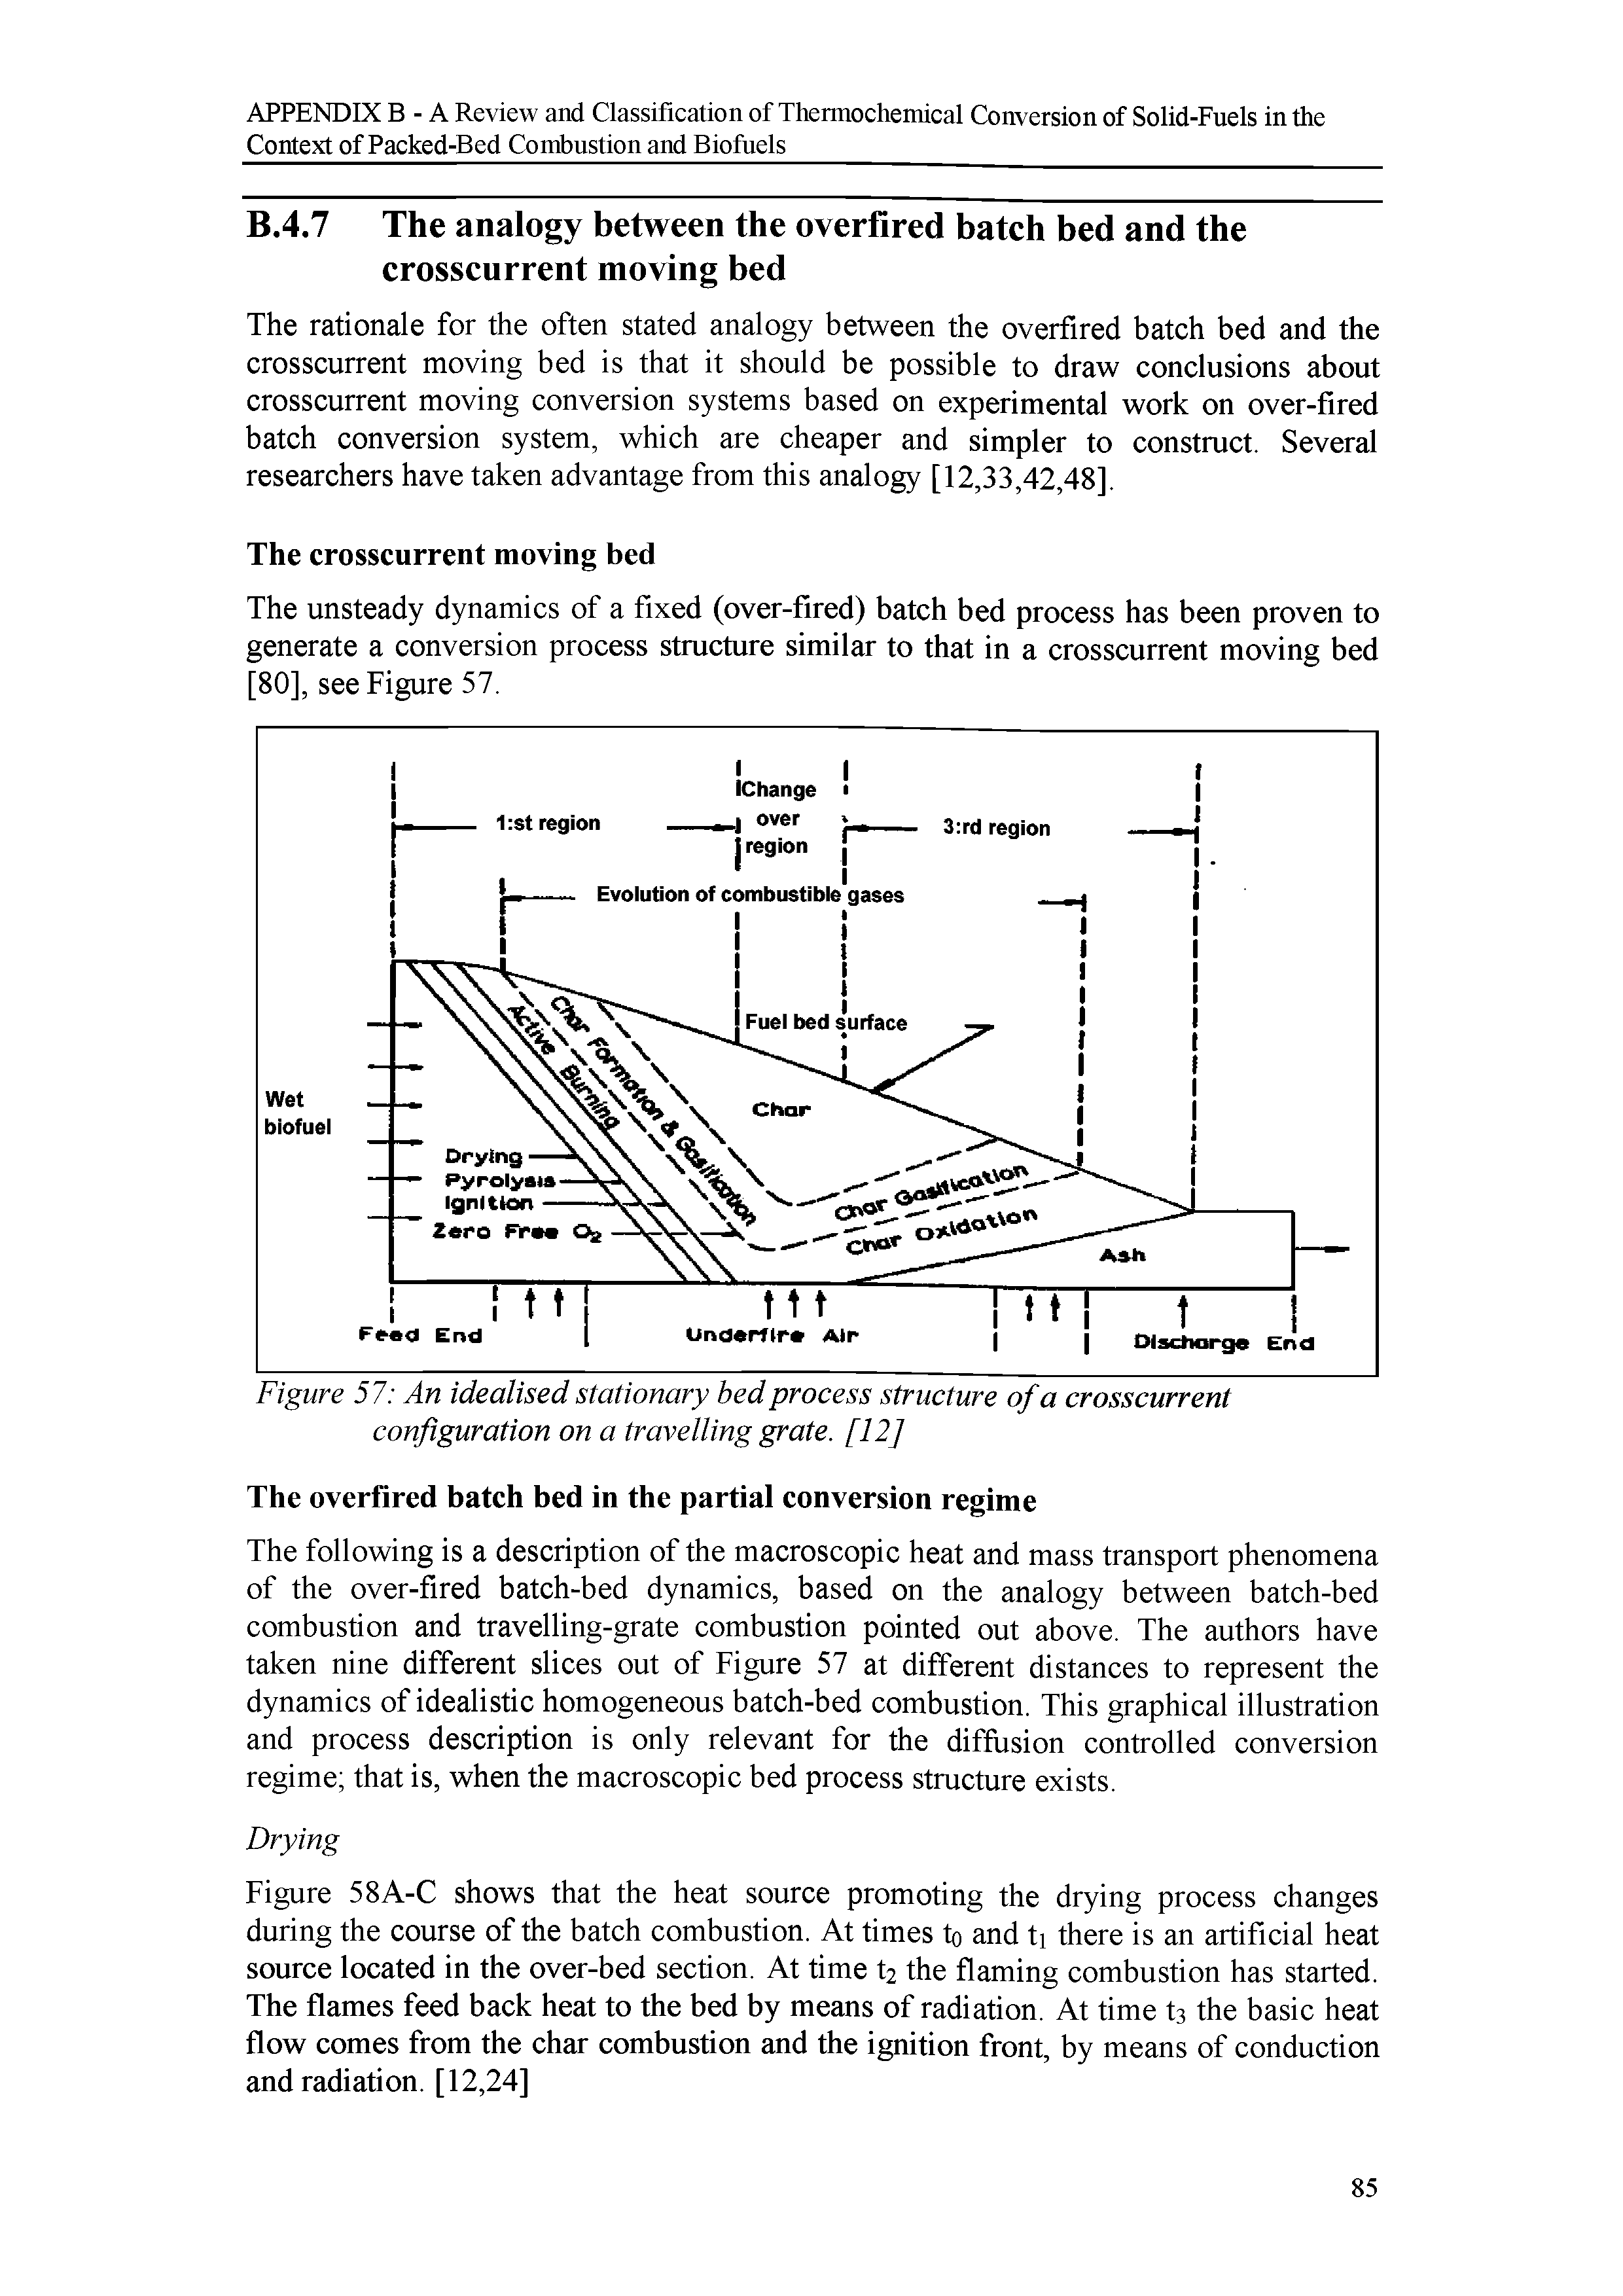 Figure 58A-C shows that the heat source promoting the drying process changes during the course of the batch combustion. At times to and ti there is an artificial heat source located in the over-bed section. At time t2 the flaming combustion has started. The flames feed back heat to the bed by means of radiation. At time t3 the basic heat flow comes from the char combustion and the ignition front, by means of conduction and radiation. [12,24]...